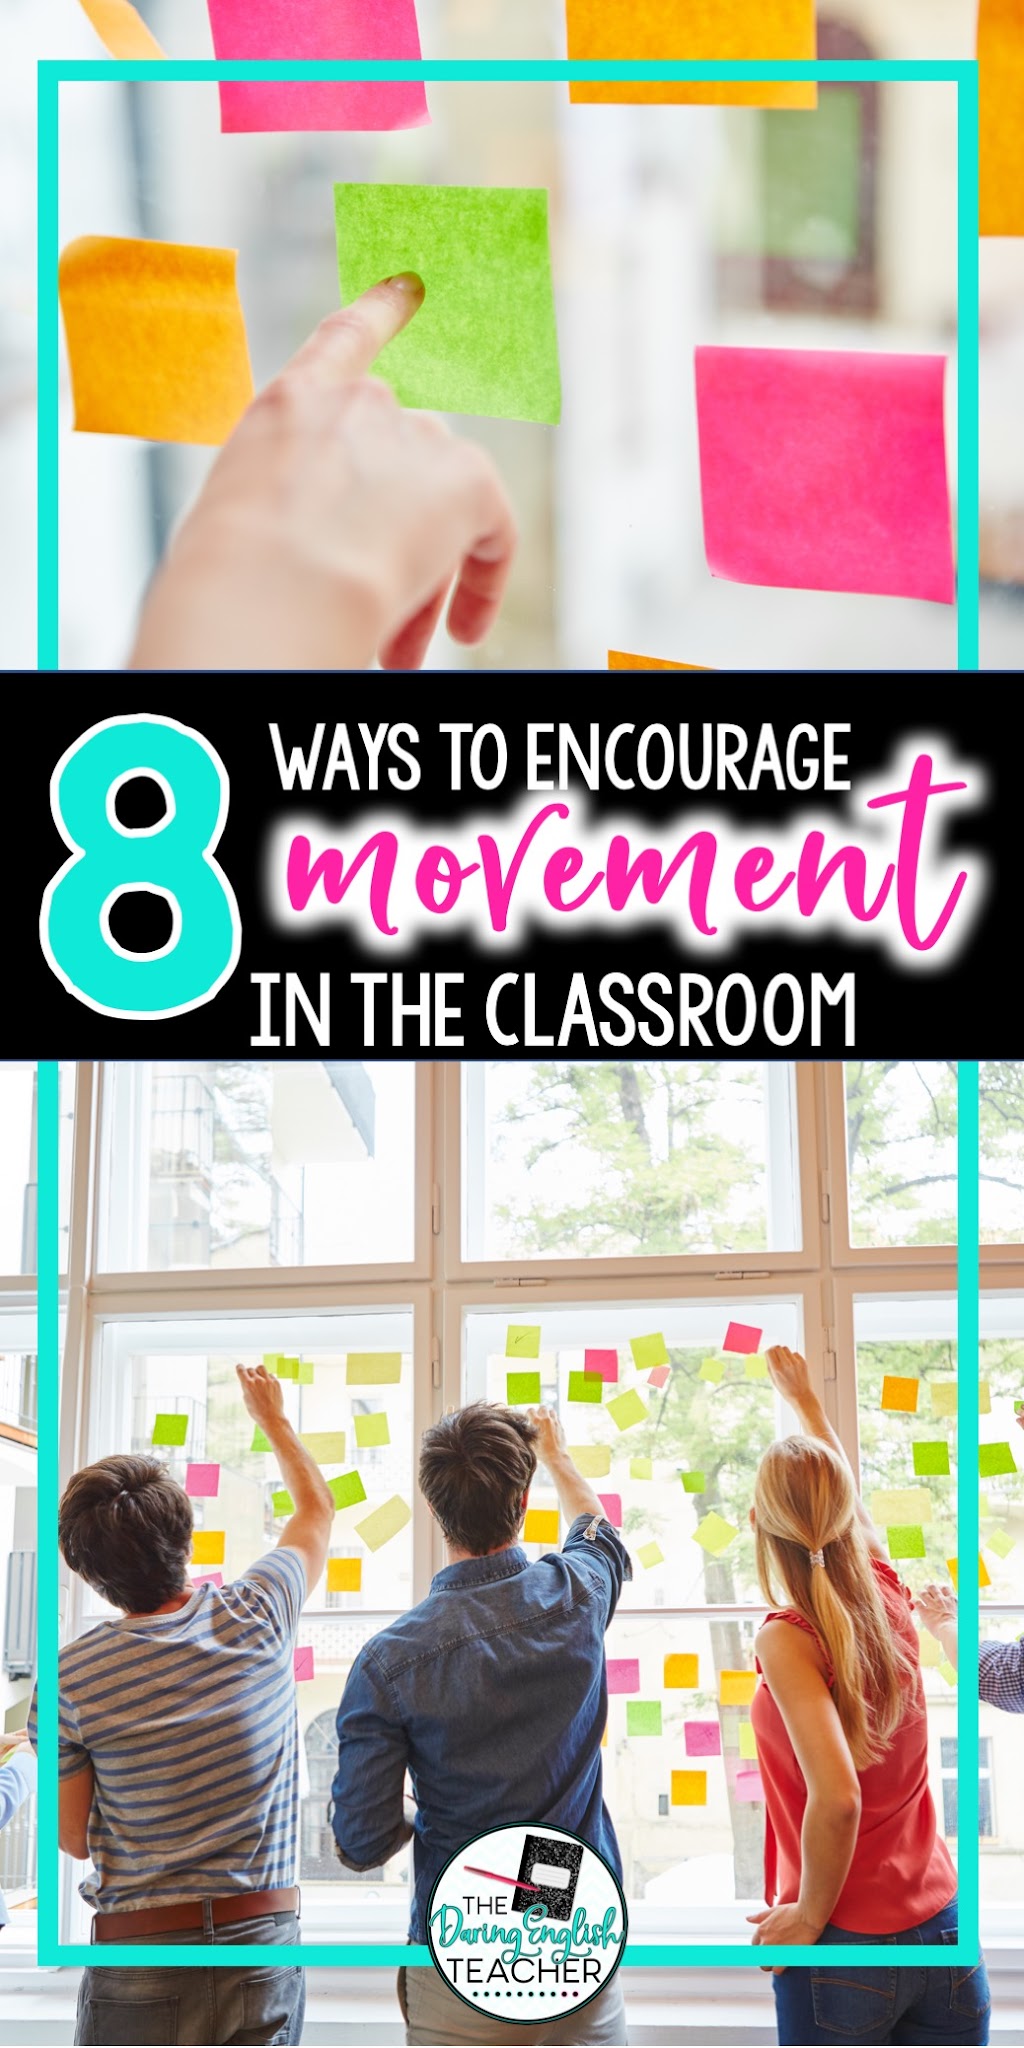 8 Ways to Get Students Moving in the Classroom